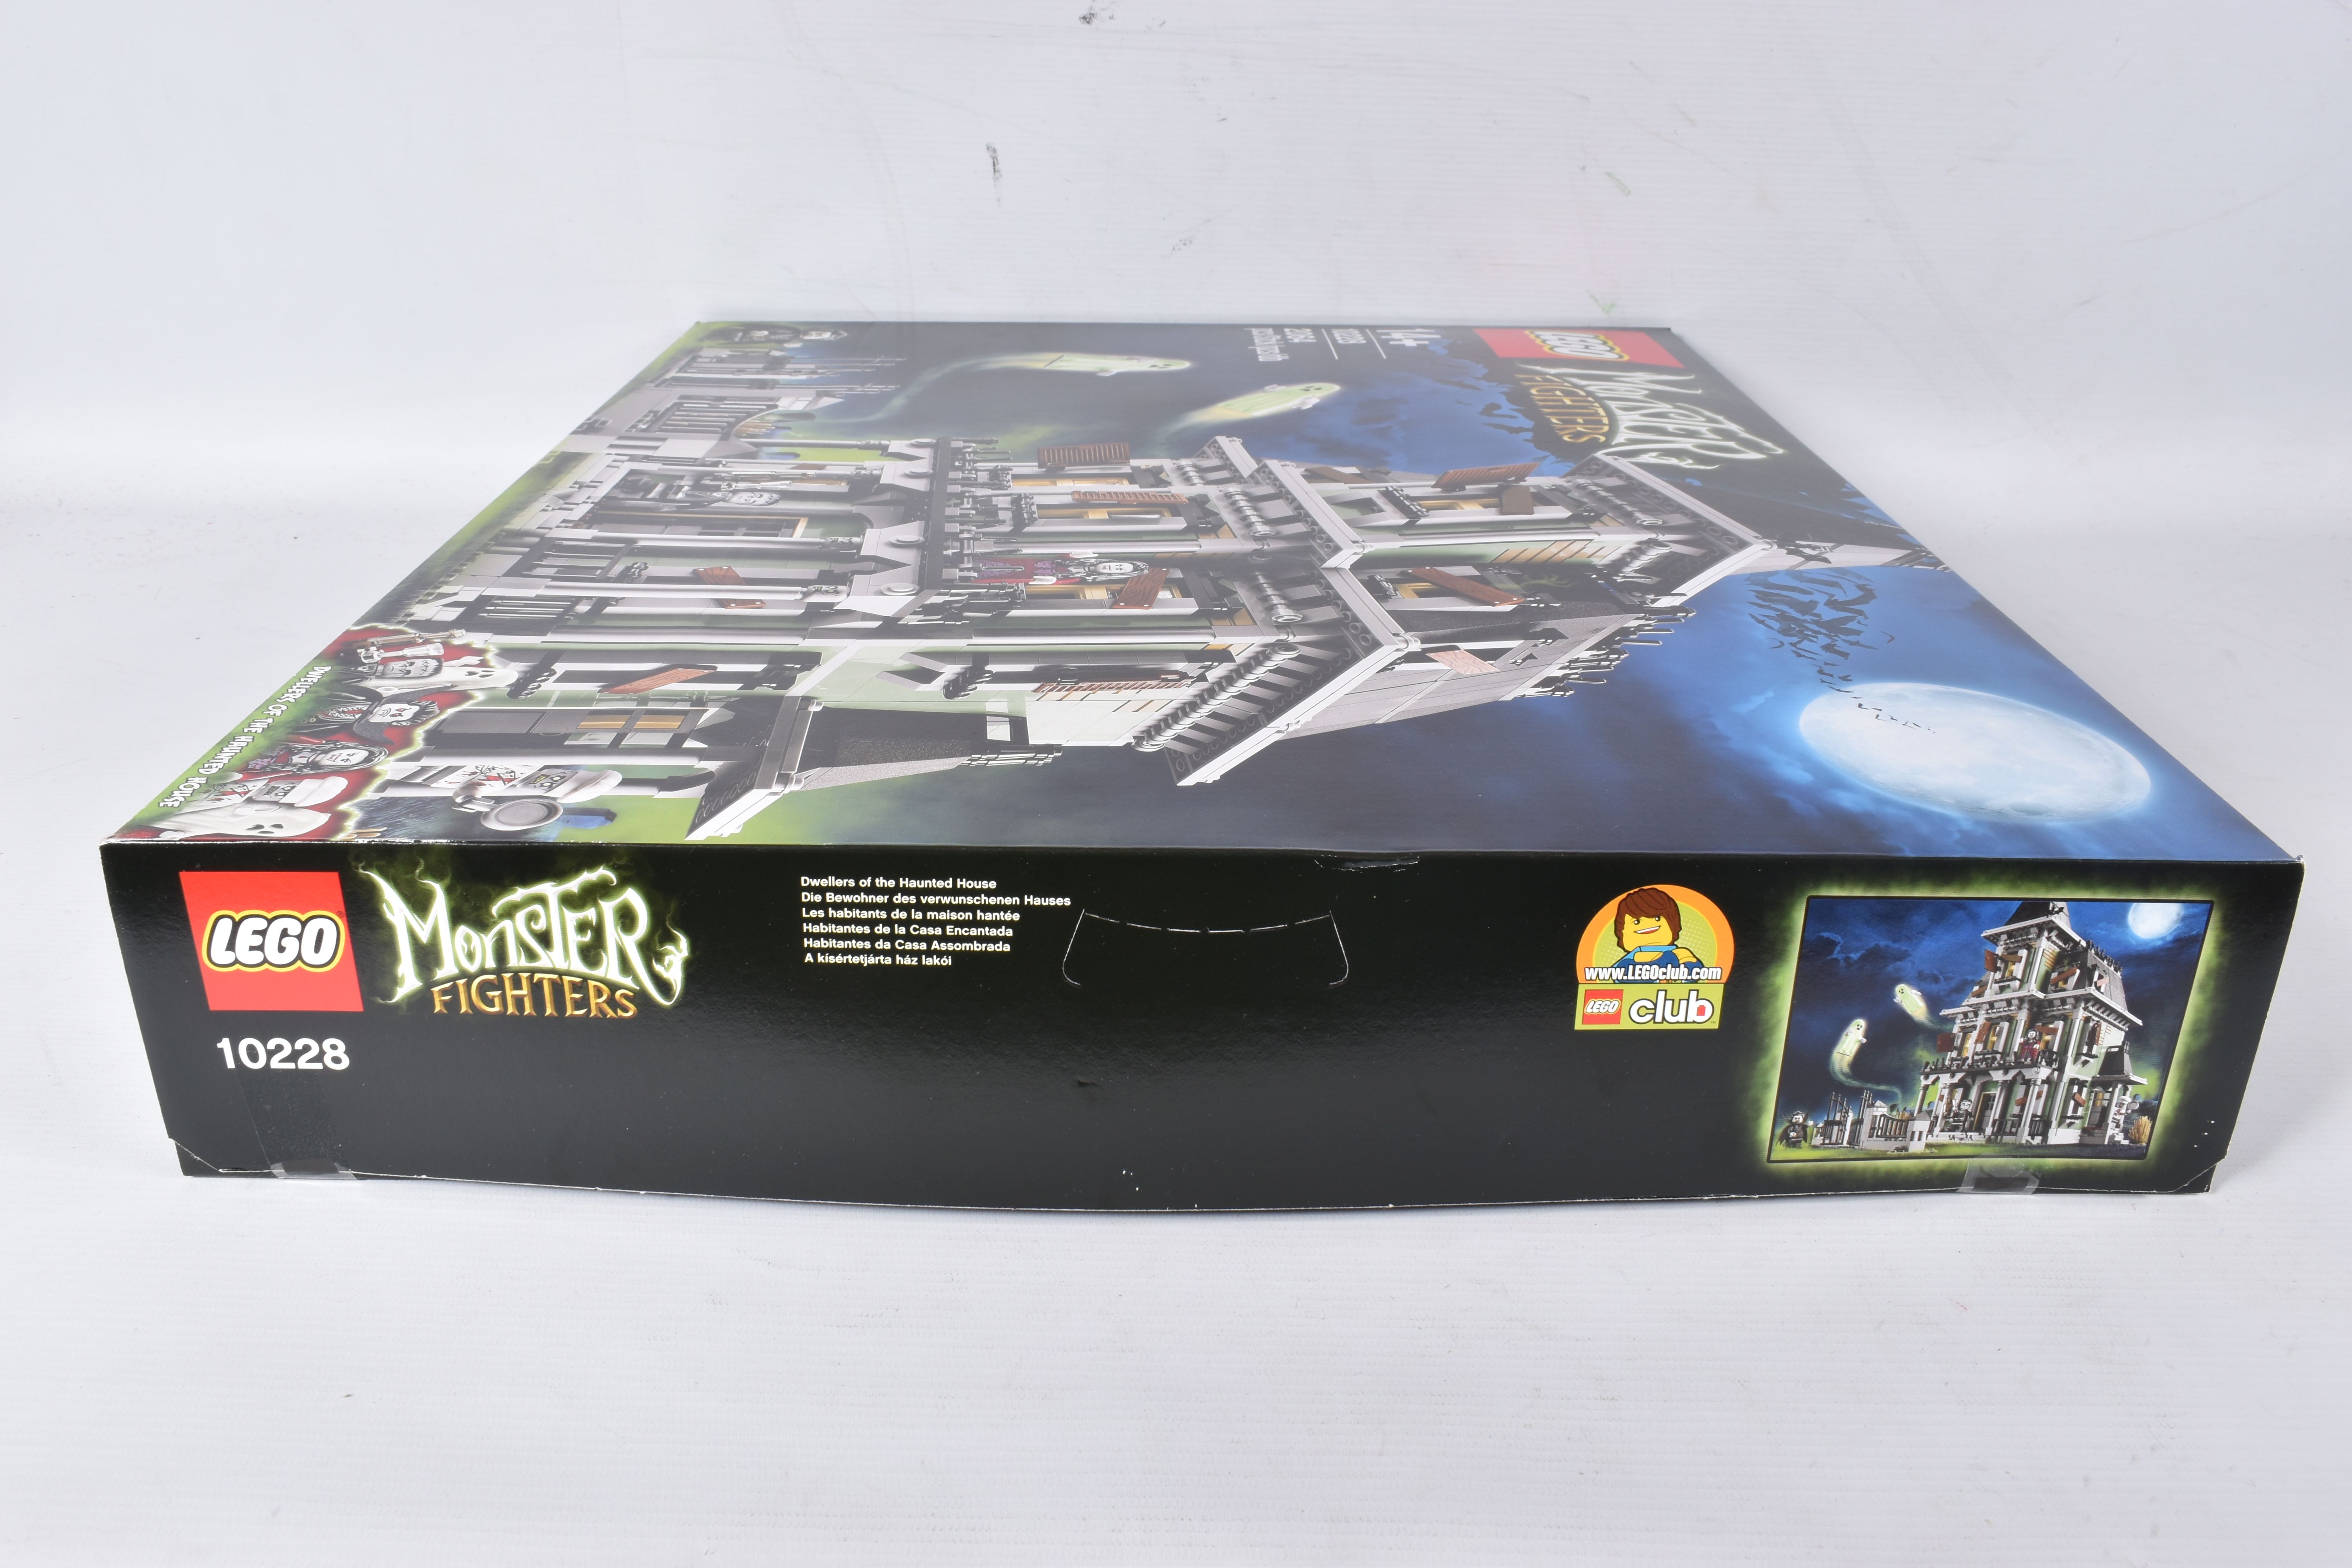 A FACTORY SEALED LEGO 'MONSTER FIGHTERS' HAUNTED HOUSE, model no. 10228, 2064 pieces, never opened - Image 22 of 27